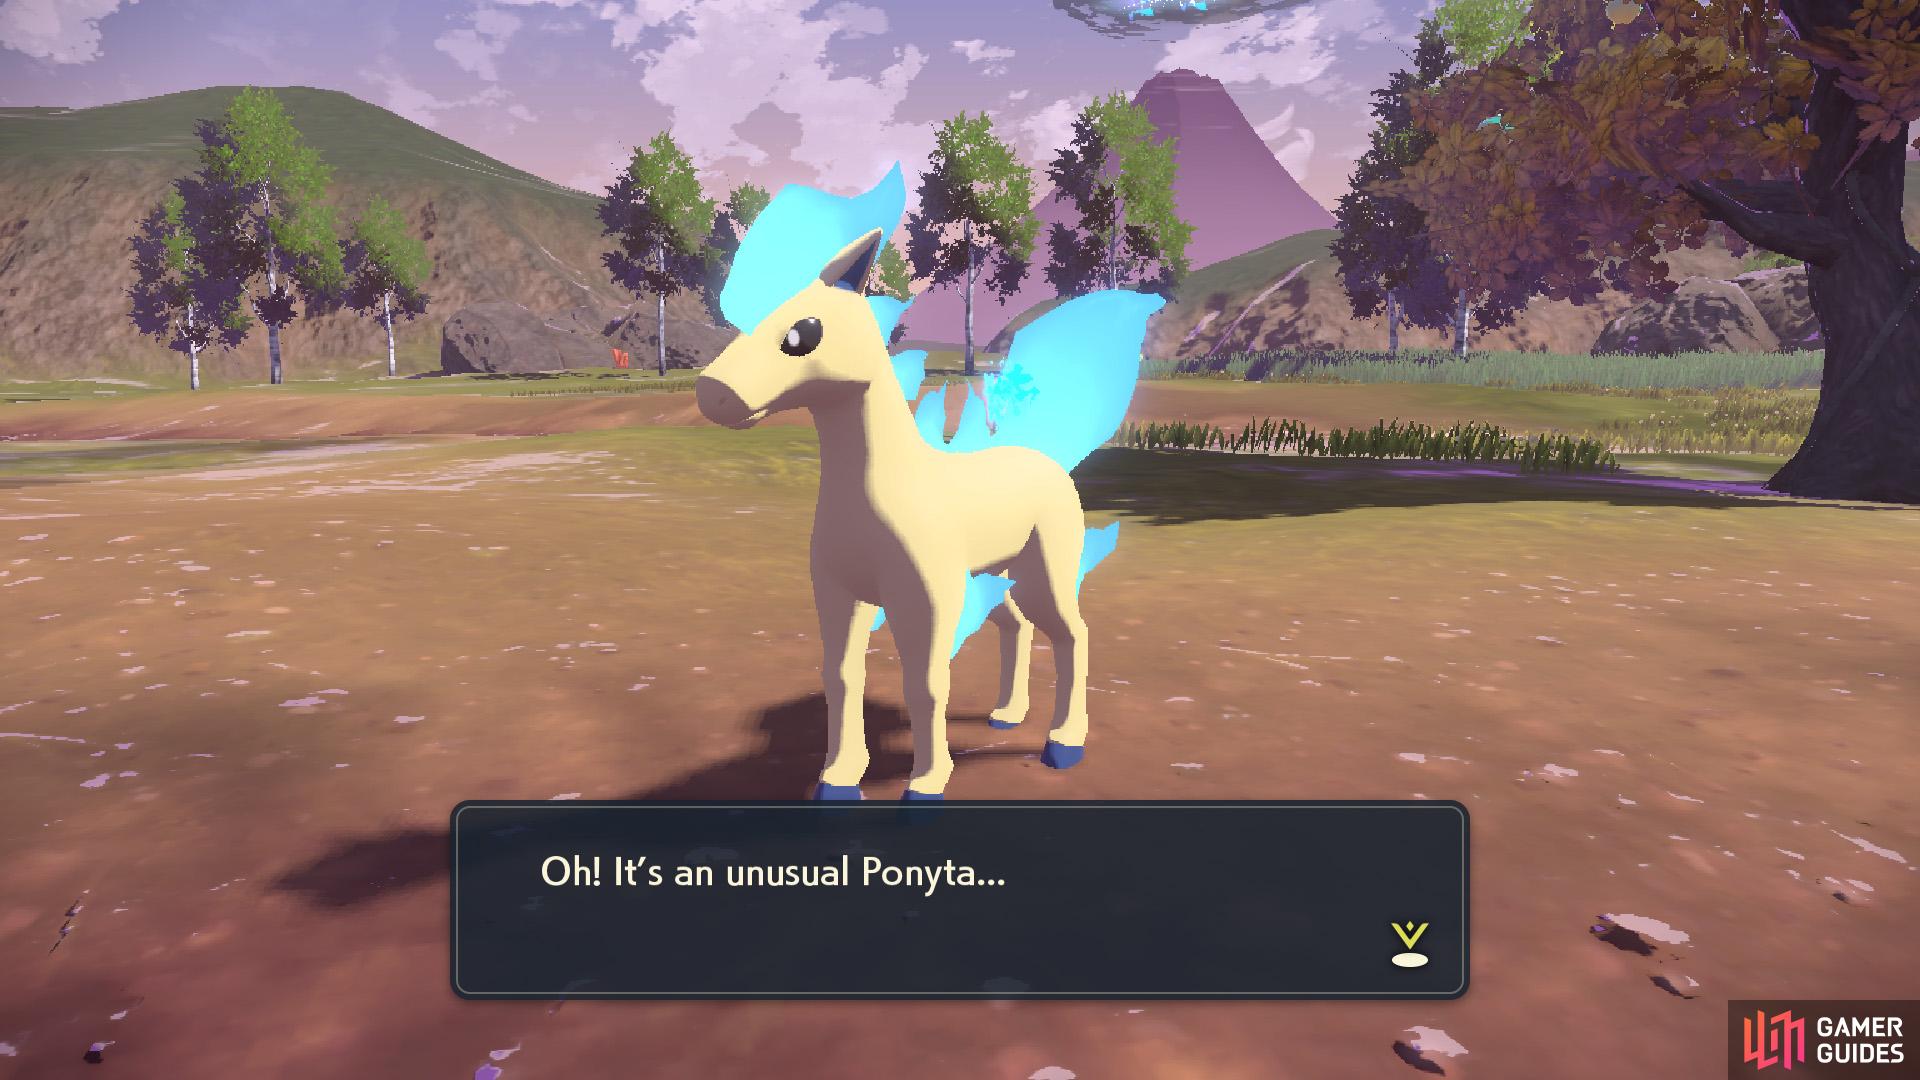 A cutscene will play and you'll discover a shiny Ponyta.